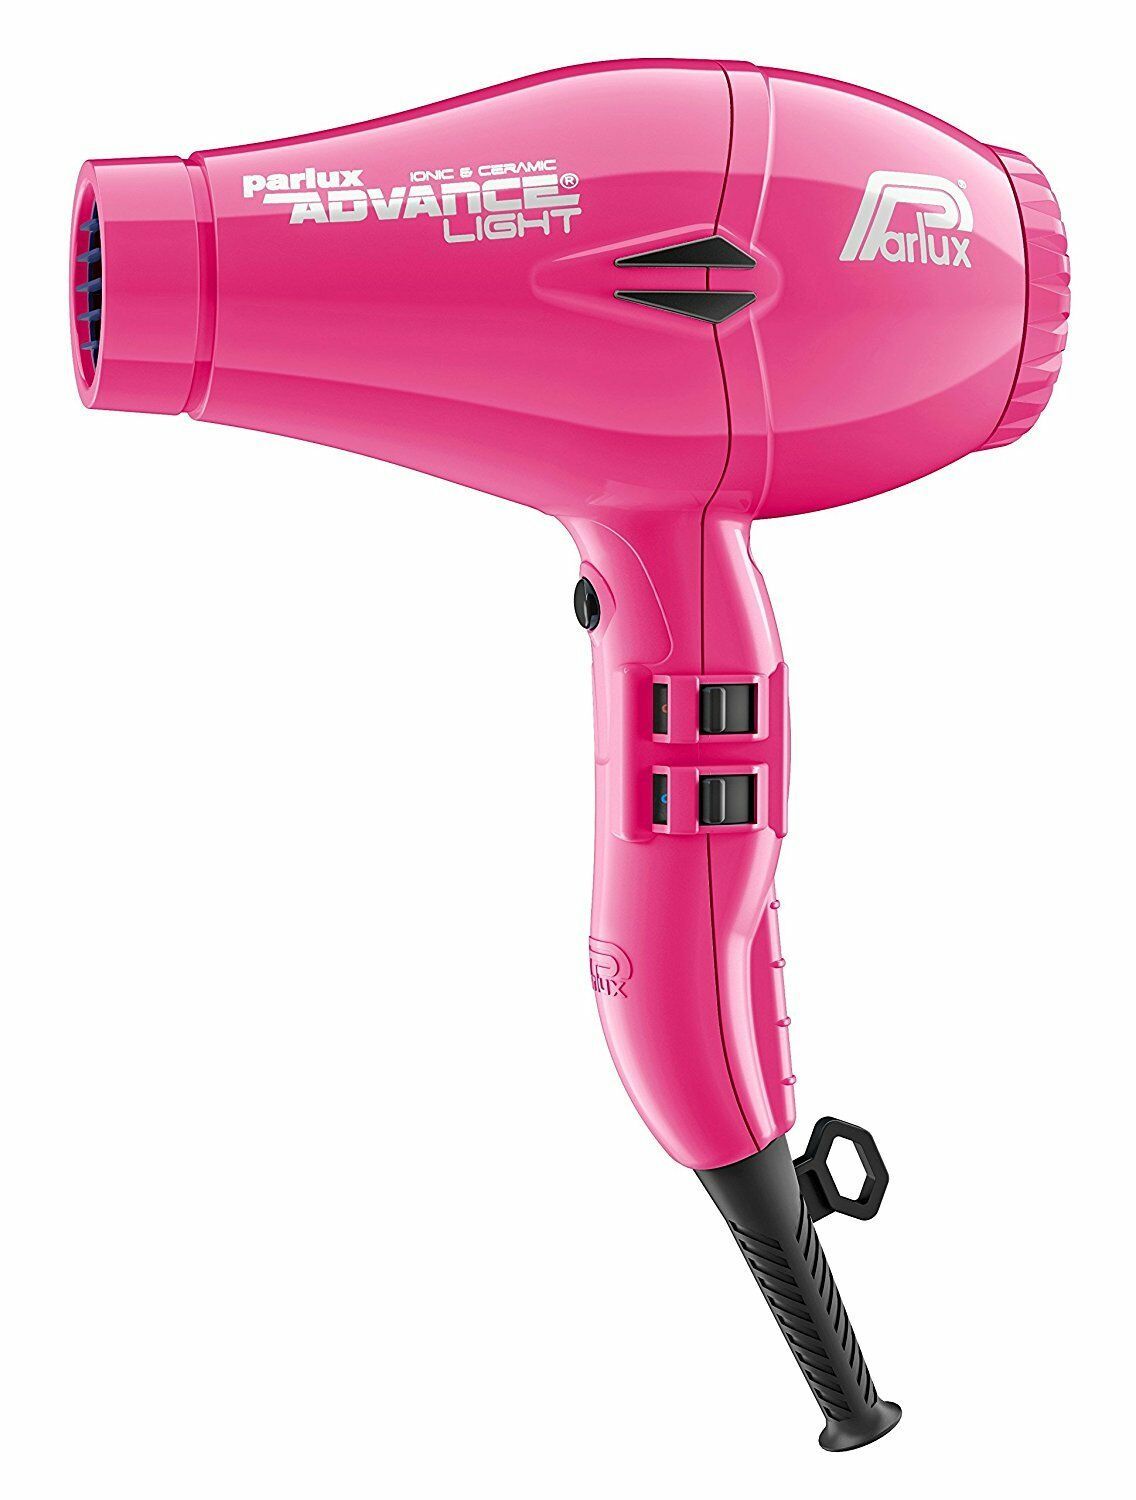 Parlux advance light pink hair dryer ionic professional 2200w 3 metres cable